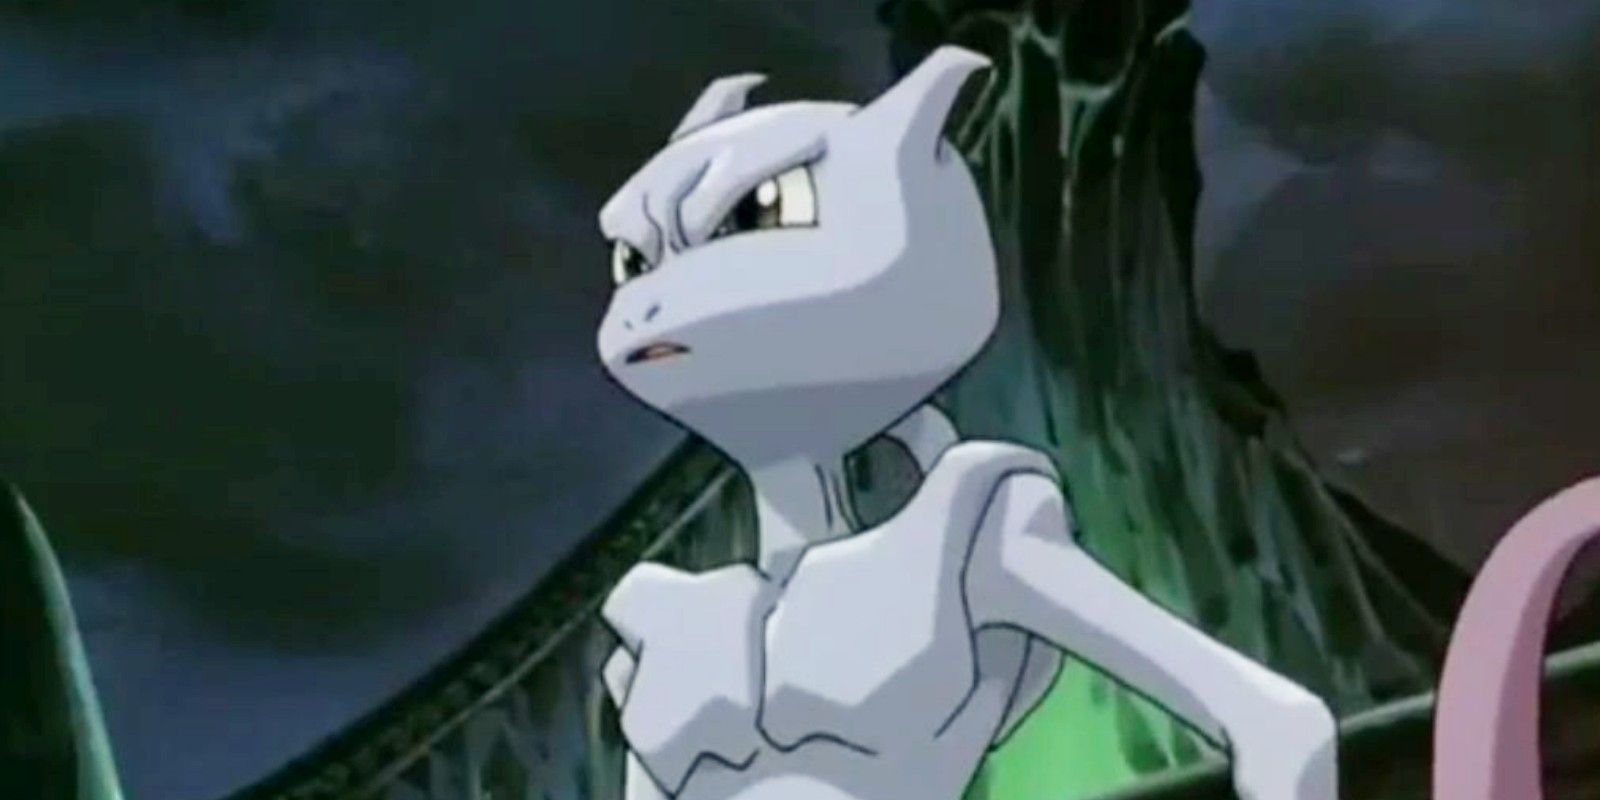 Dr. Fuji Voice - Pokemon the Movie: Mewtwo Strikes Back Evolution (Movie) -  Behind The Voice Actors